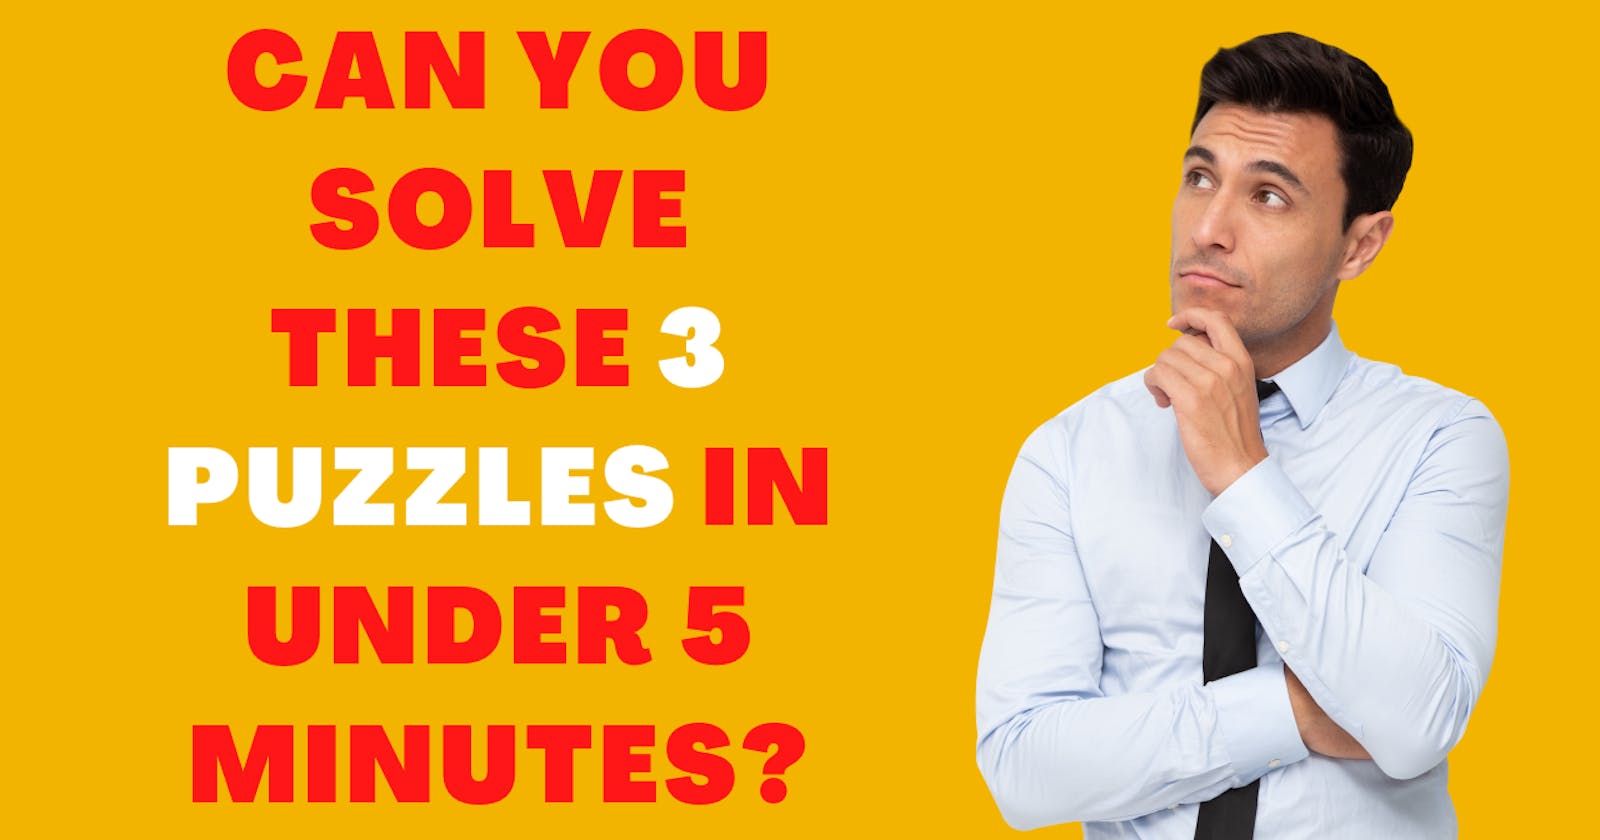 Can you solve these 3 puzzles in under 5 minutes? Let's have fun